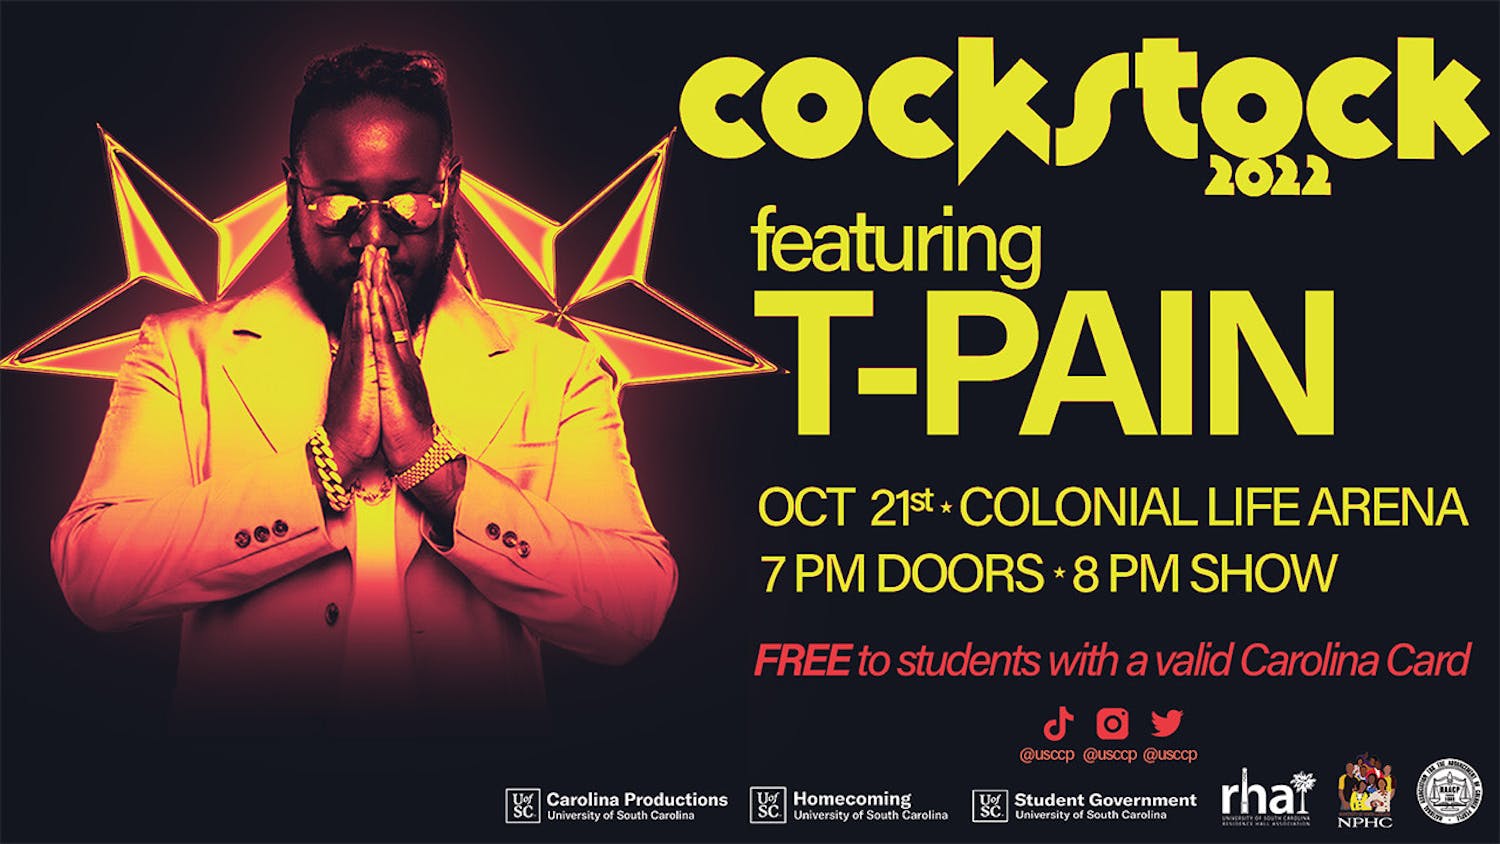 Advertisement for Cock Stock 2022 featuring T-Pain. The event takes place on October 21, 2022.